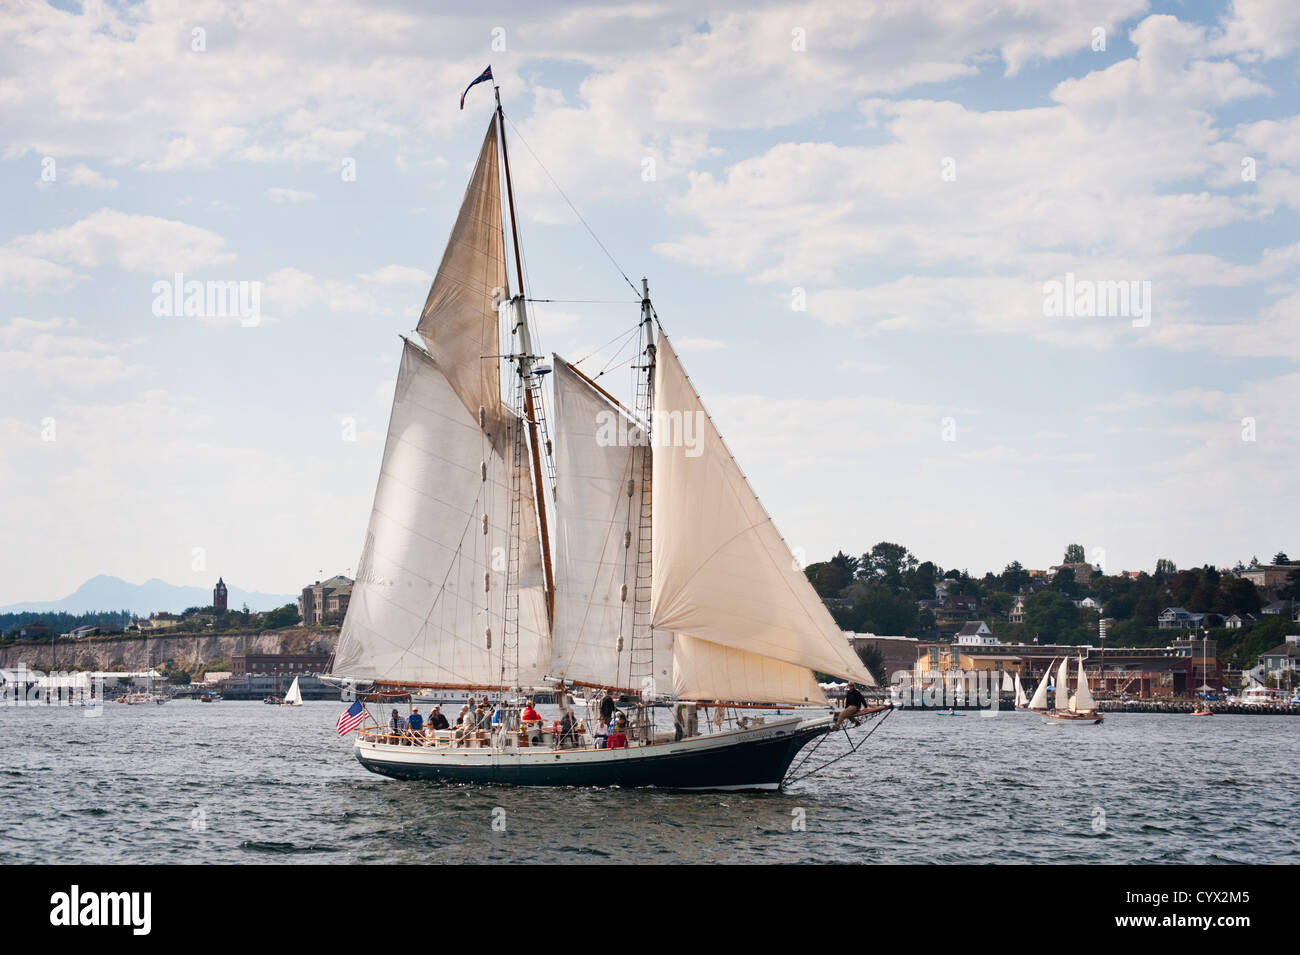 During the Port Townsend Wooden Boat Festival a schooner race was held with many historic wooden tall ships and sailboats. Stock Photo